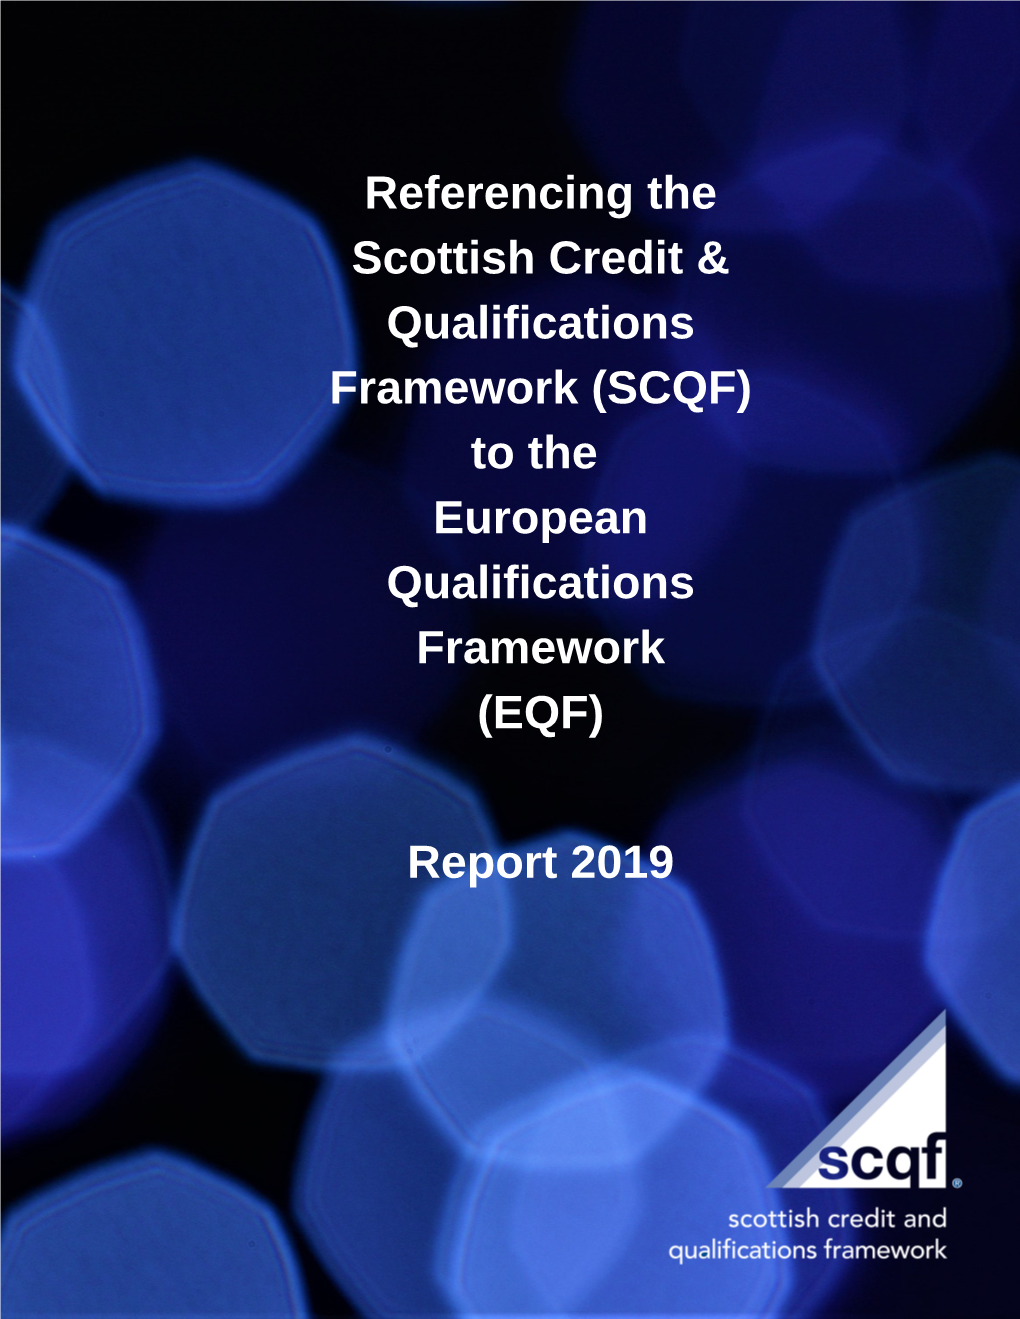 Referencing the SCQF to the EQF (2019 Report)